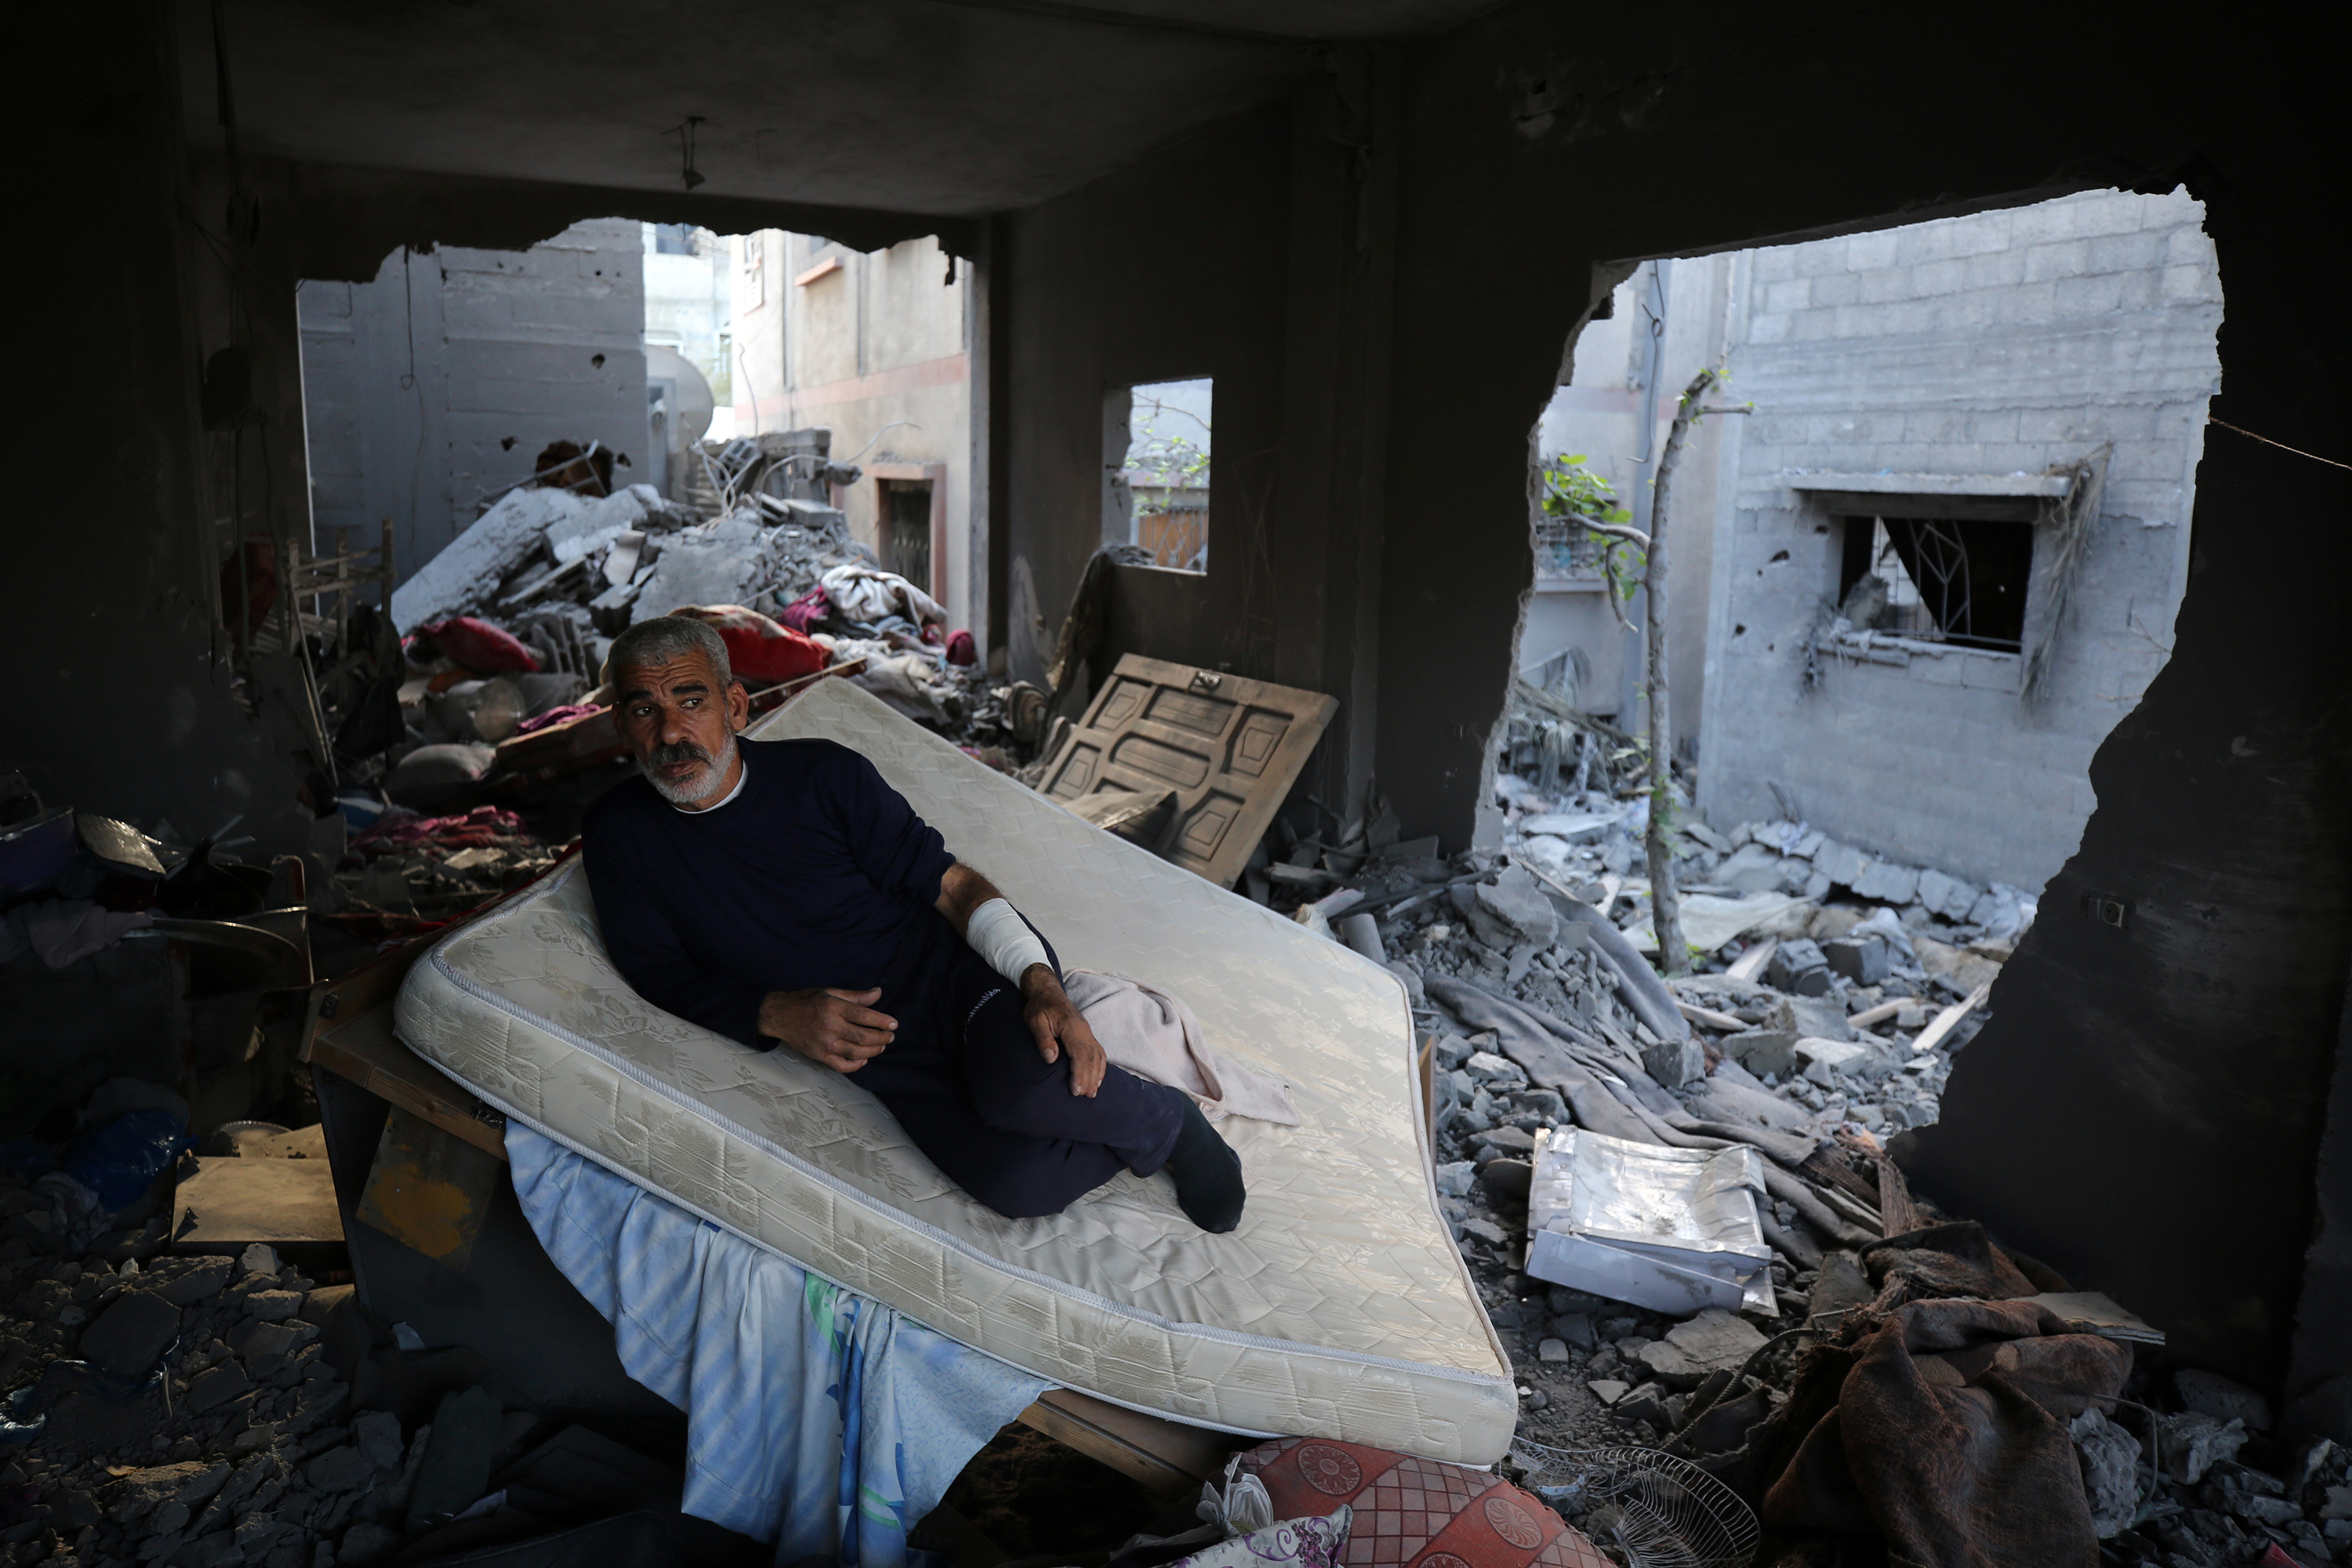 A Palestinian man sits in his home destroyed during the Israeli bombardment of Gaza, in Deir al-Balah, in the central Gaza Strip on November 15.